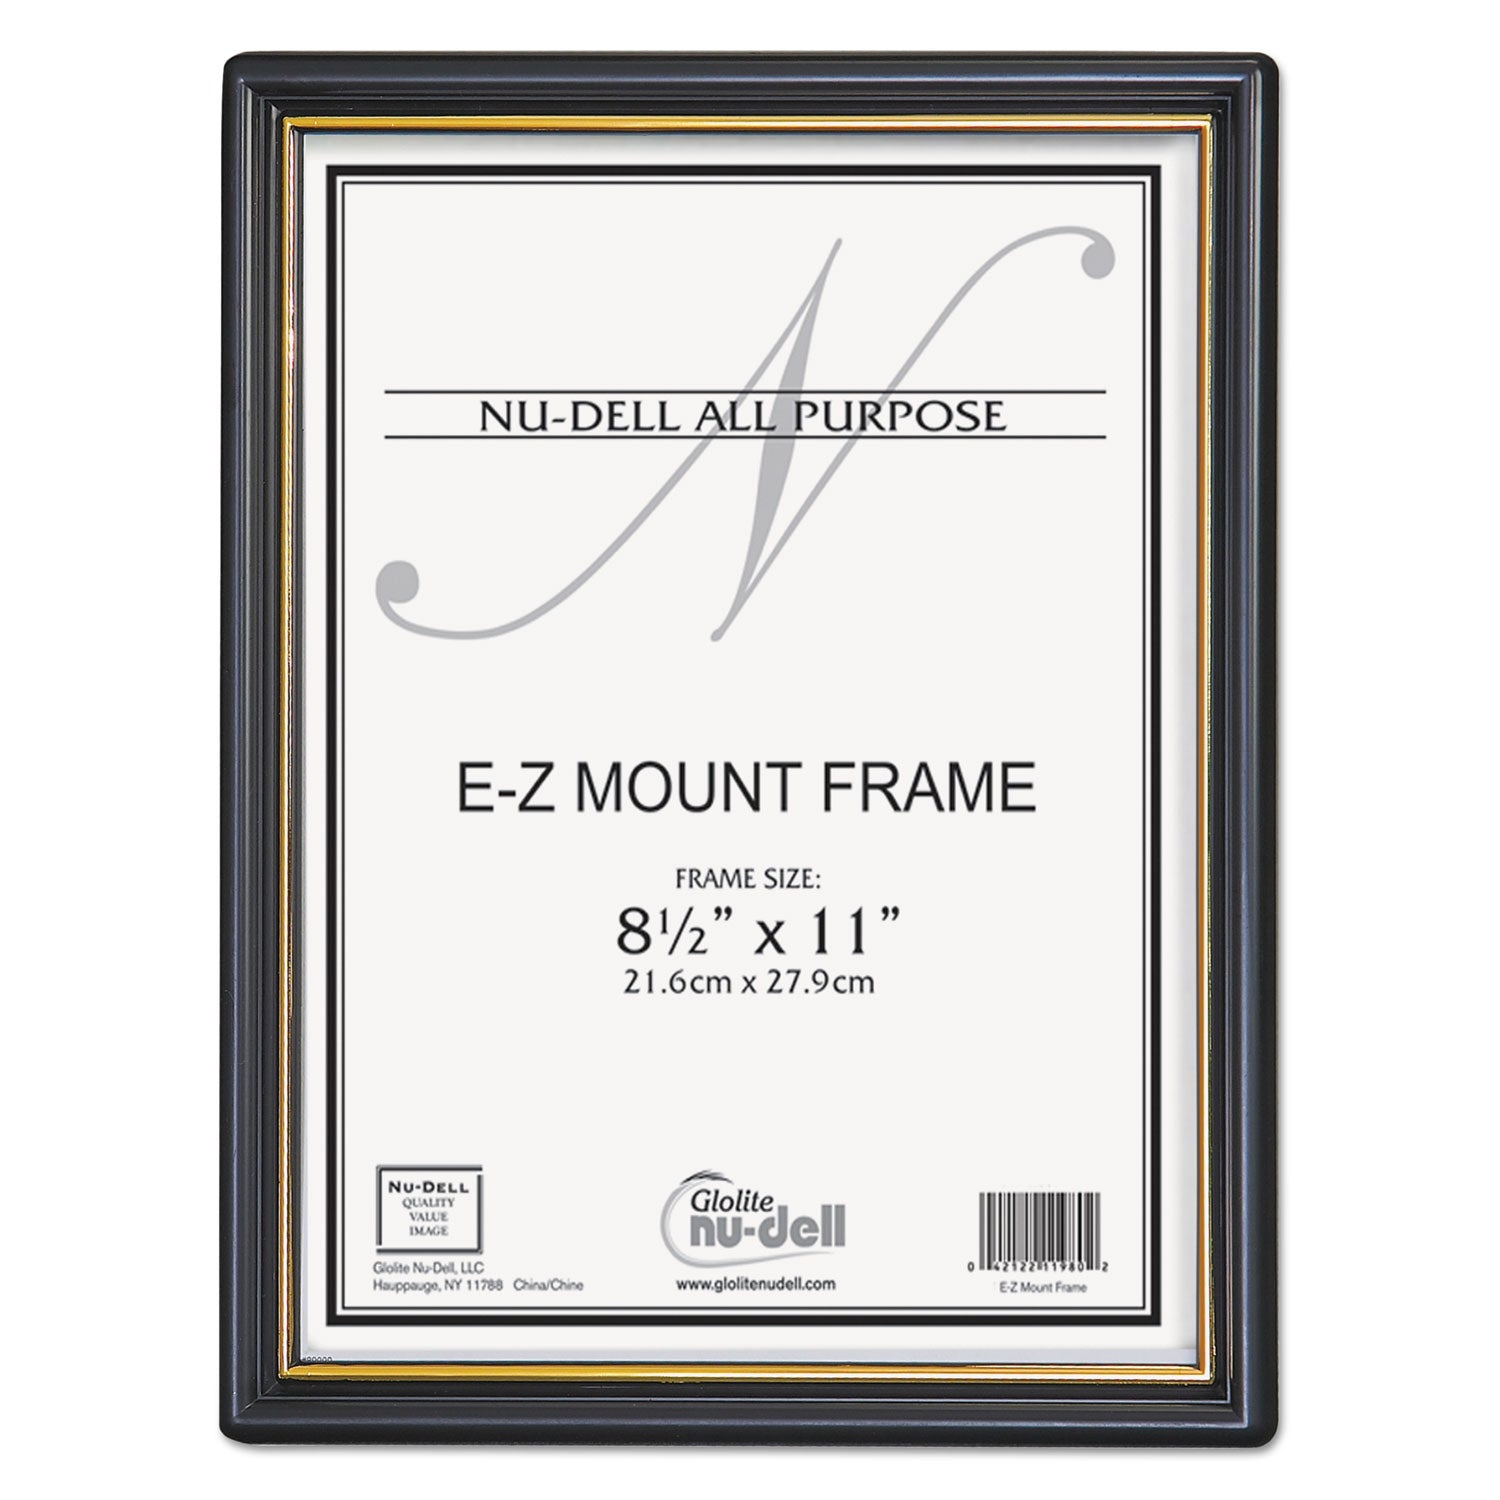 EZ Mount Document Frame with Trim Accent and Plastic Face, Plastic, 8.5 x 11 Insert, Black/Gold - 